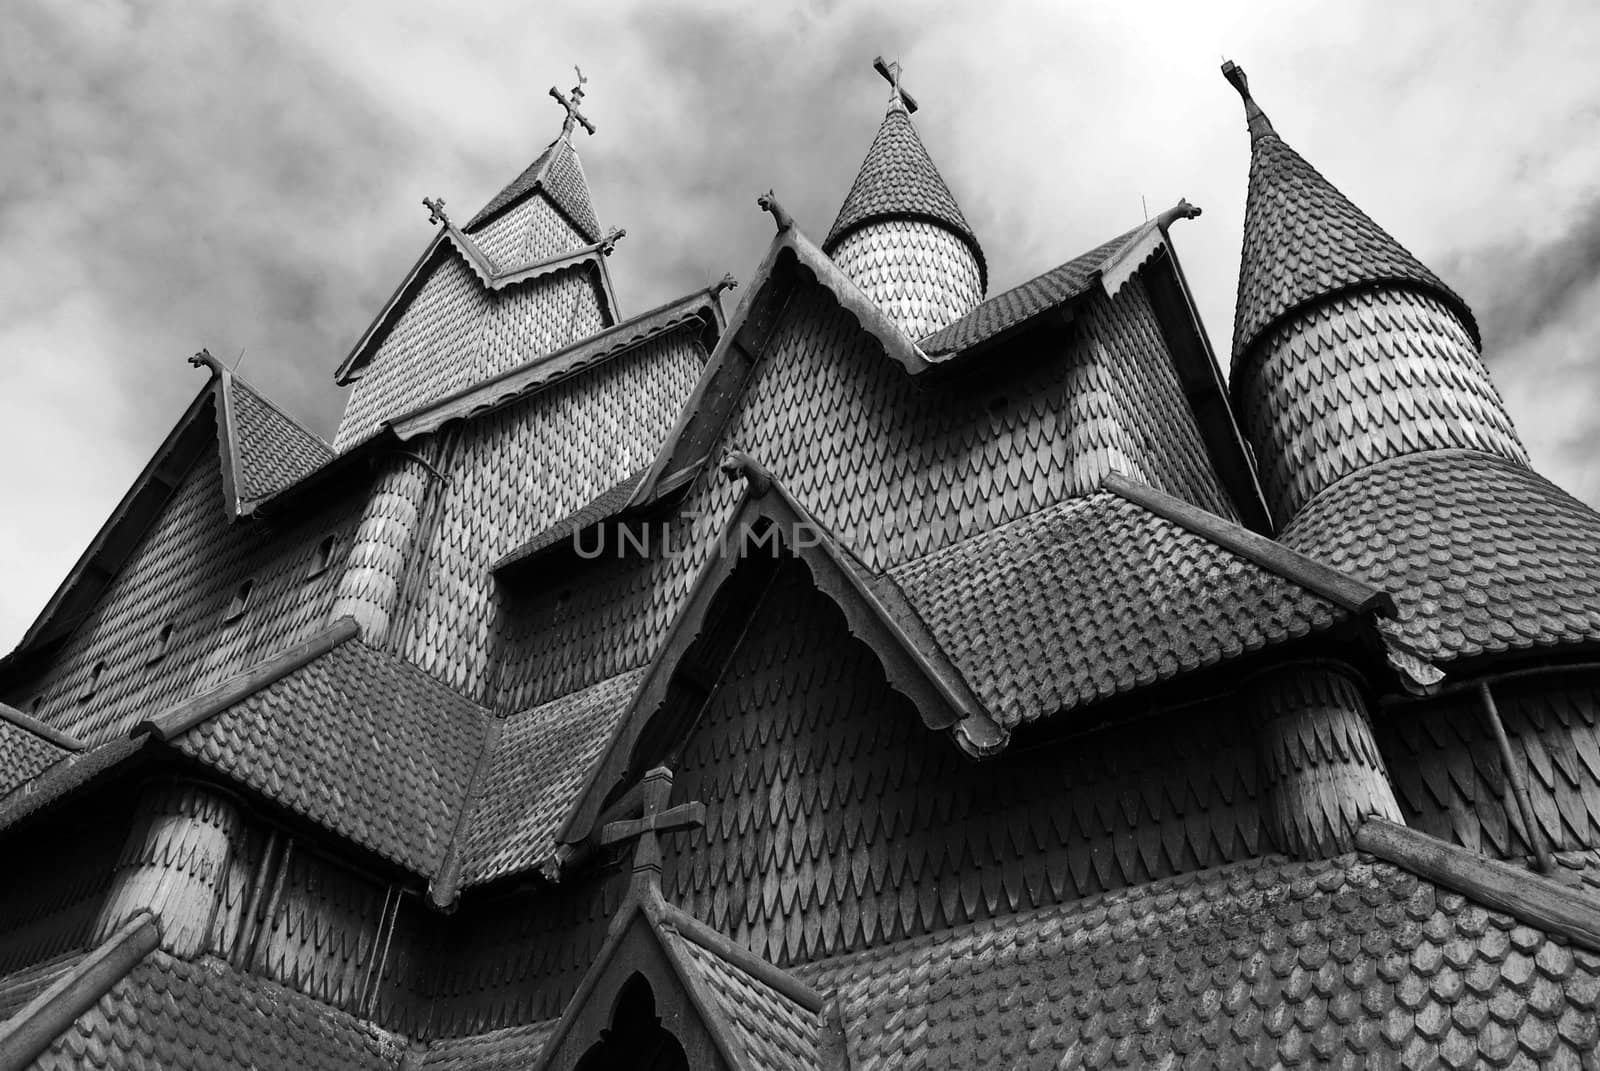 Heddal stave church (Heddal stavkirke) is a stave church located at Heddal in Notodden municipality, Norway. The church is a triple nave stave church and is Norway's largest stave church. It was constructed at the beginning of the 13th century.